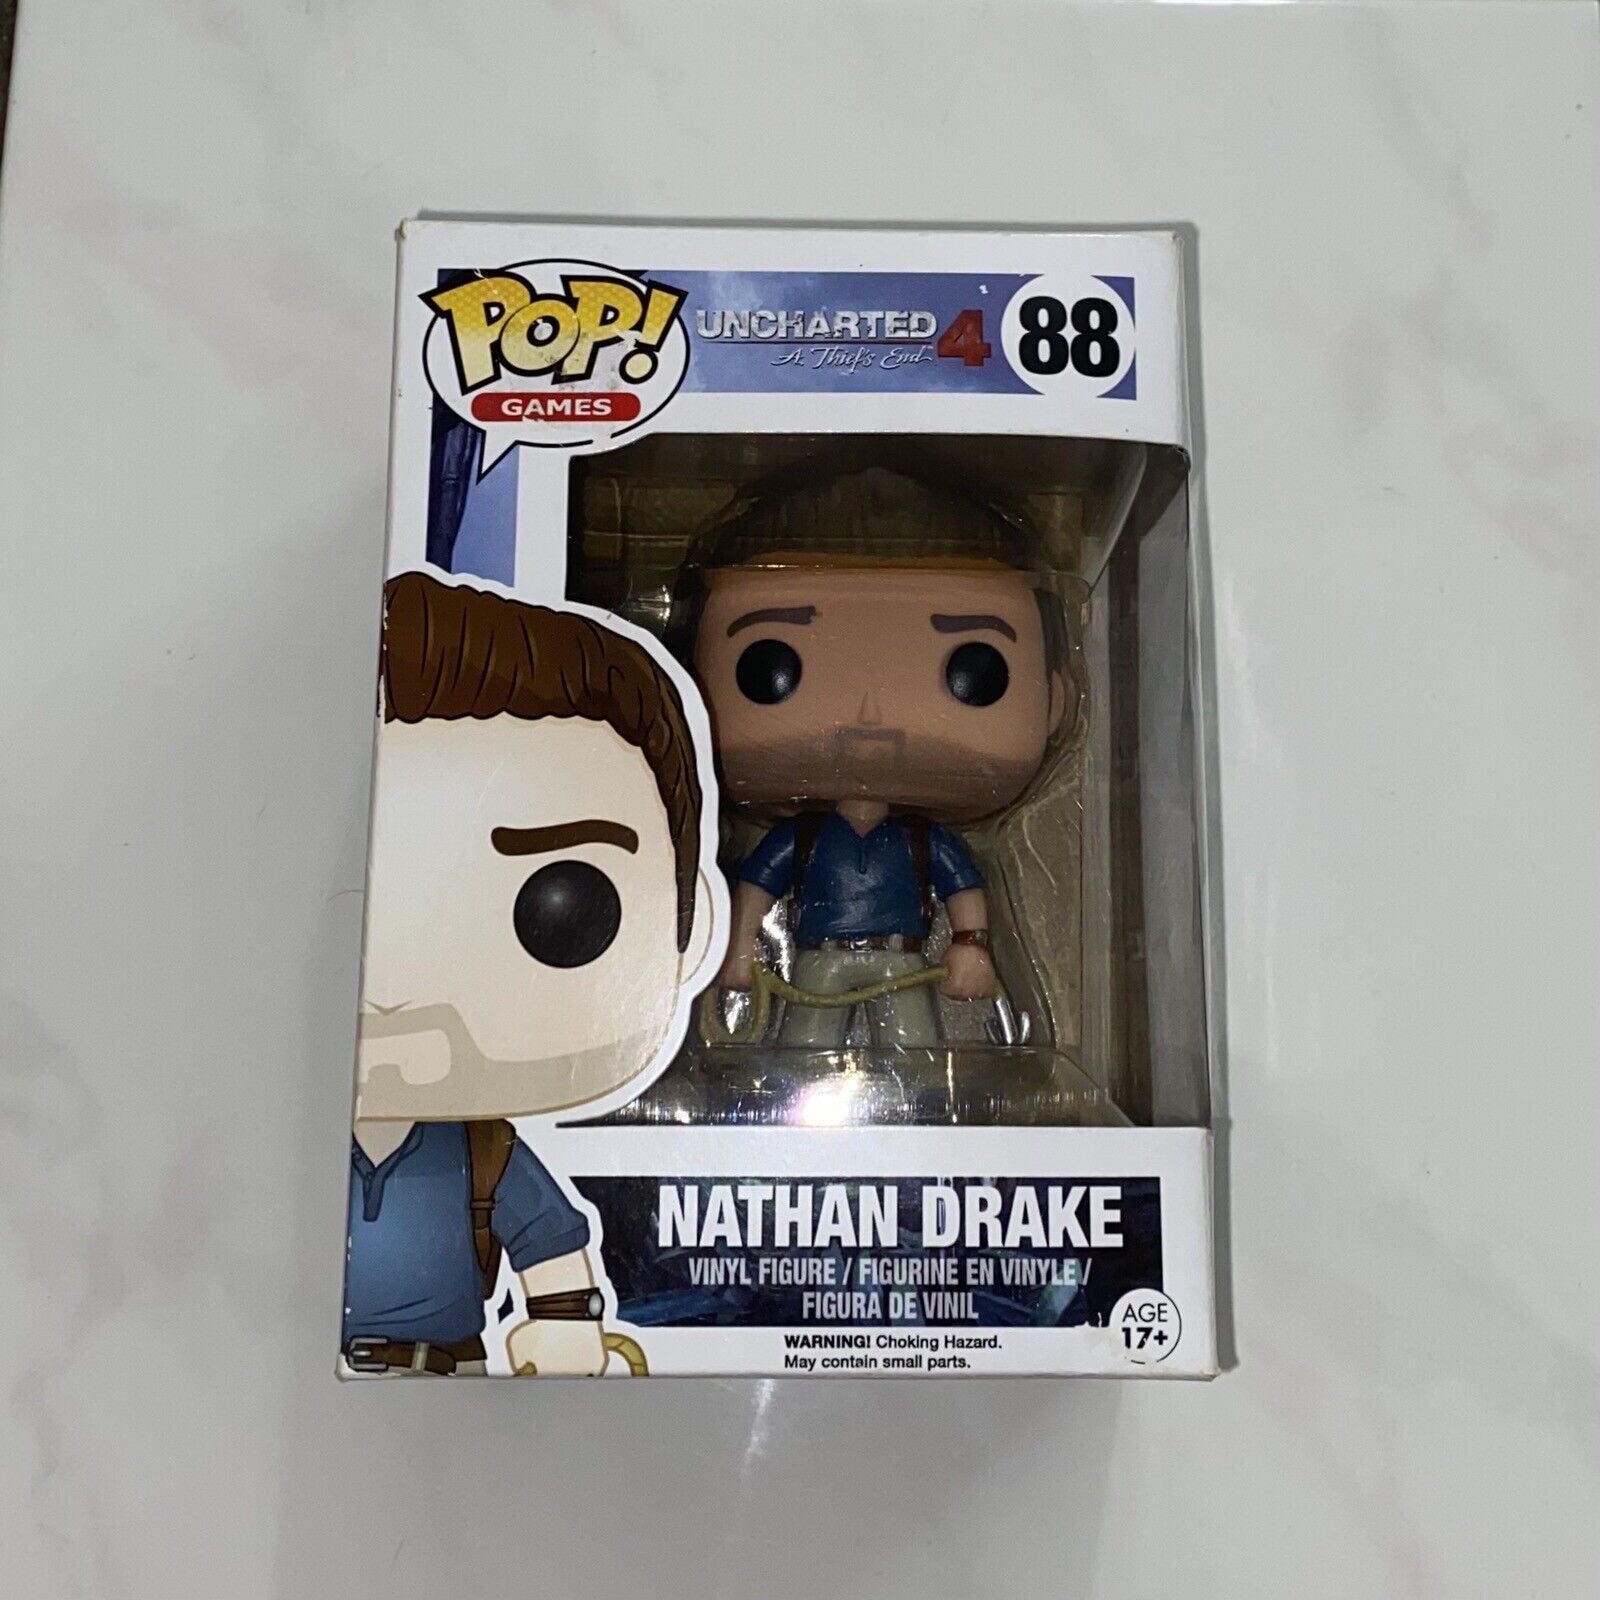 Funko Pop Uncharted 4 A Thief's End Nathan Drake #88 Vinyl Figure